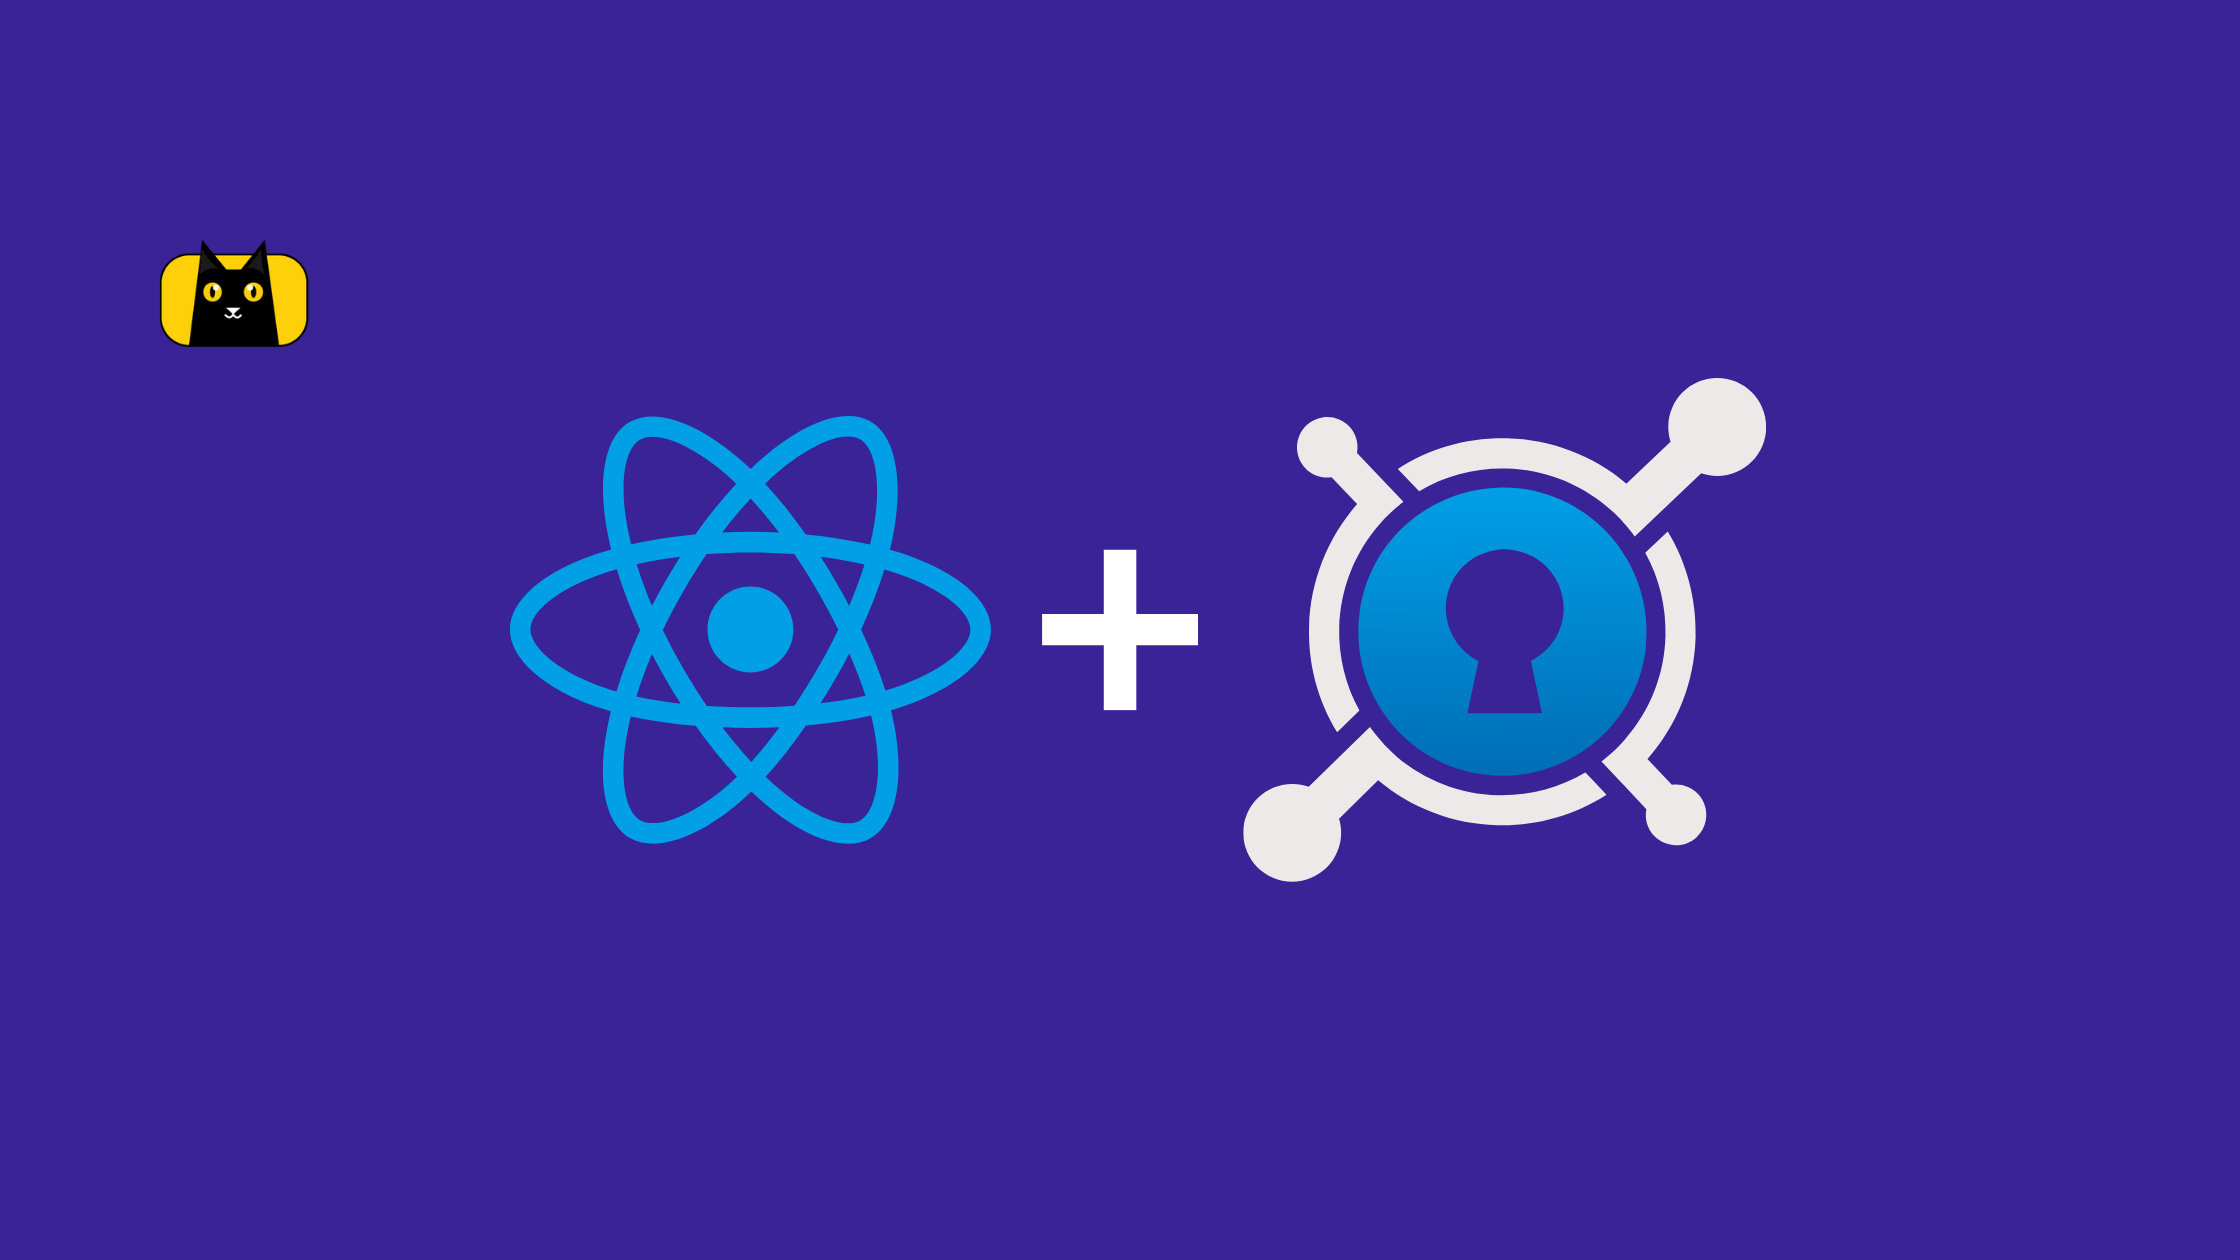 A picture of a key lock, a React logo, and a CopyCat logo.